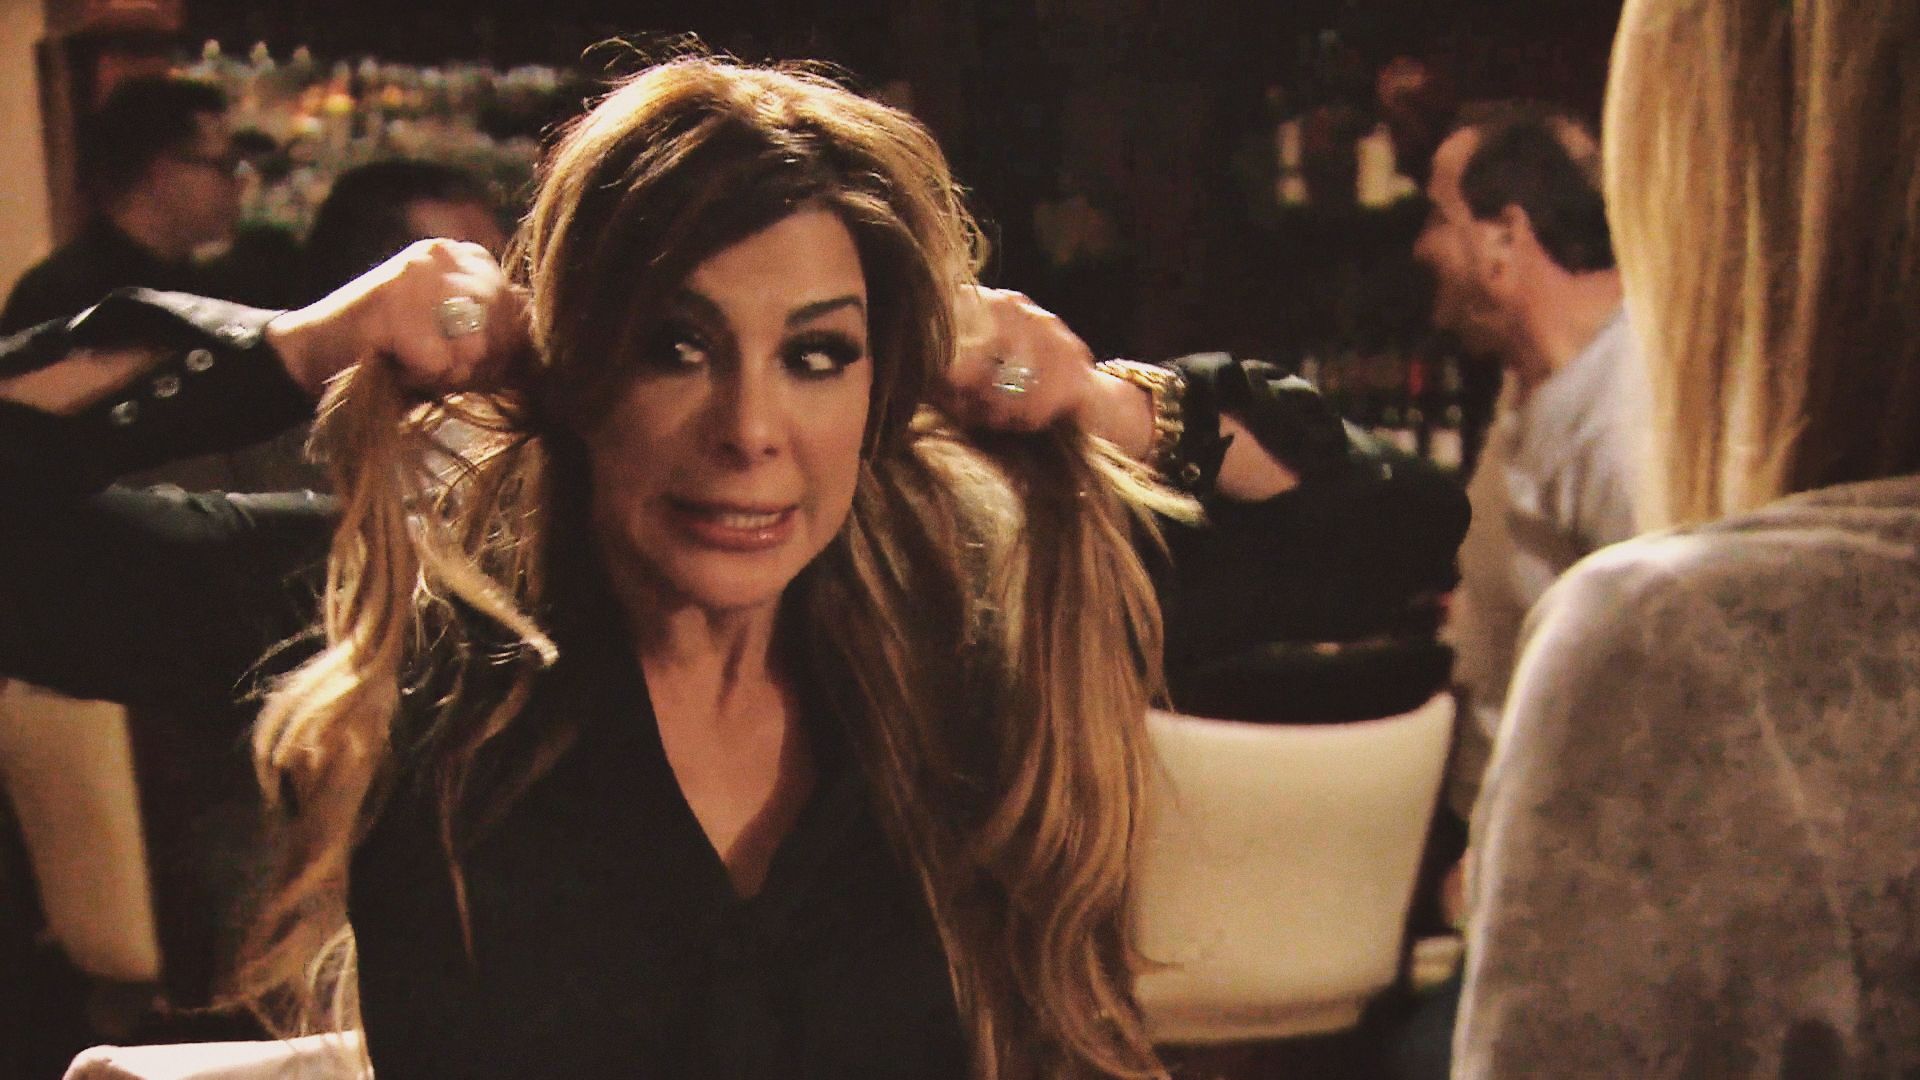 RHONJ The Real Housewives of New Jersey S8E3 saison 8 épisode 3 The Apology